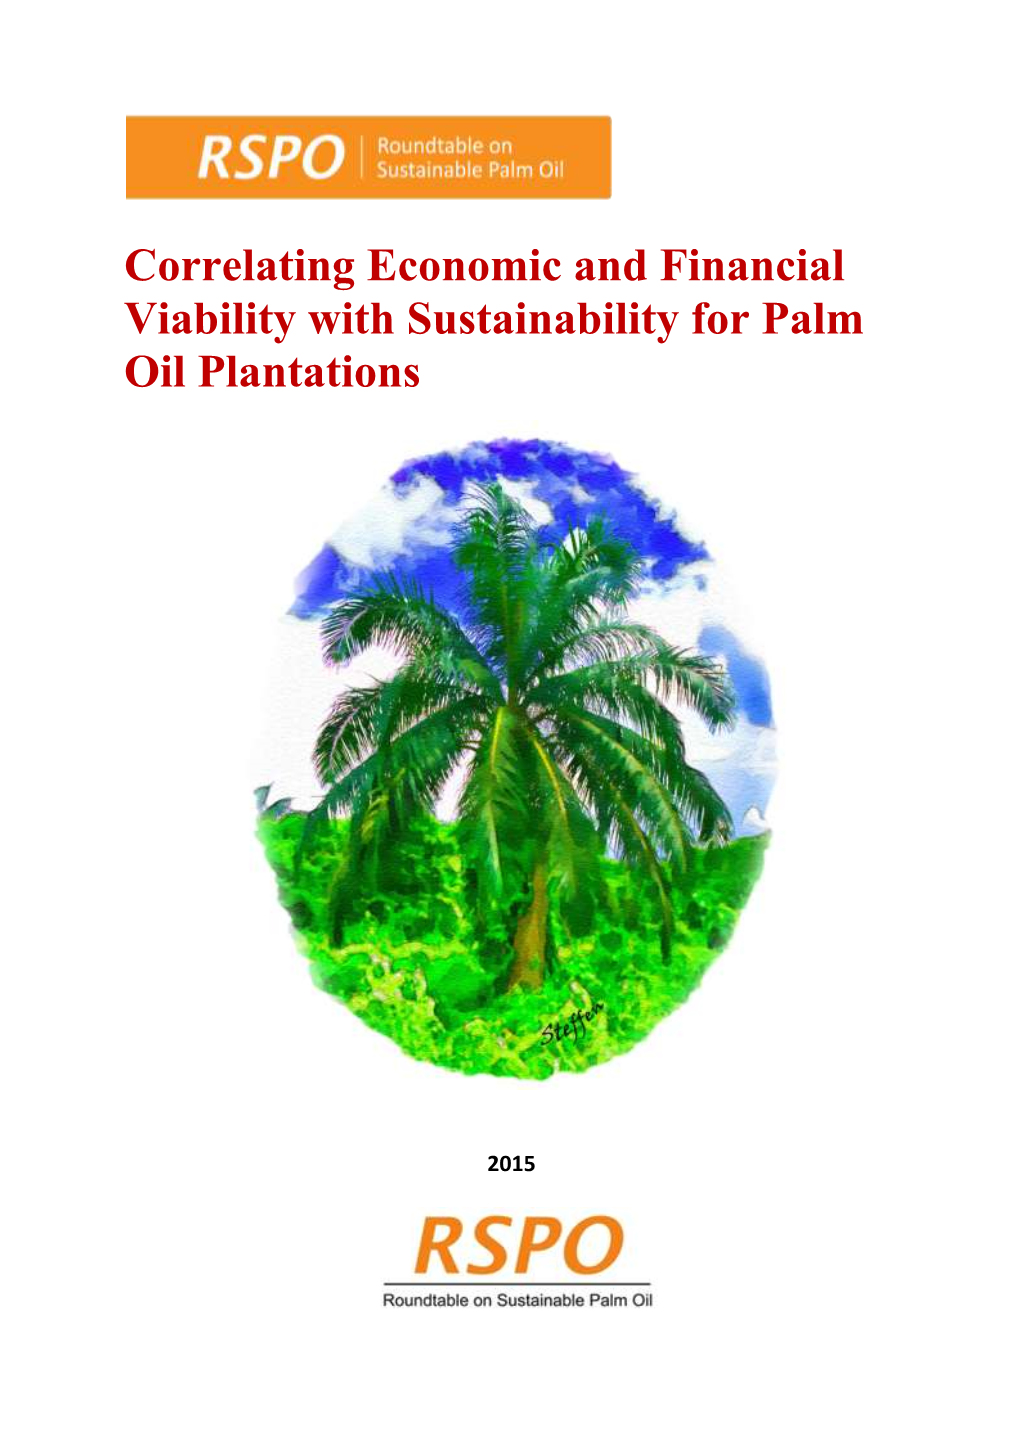 Correlating Economic and Financial Viability with Sustainability for Palm Oil Plantations